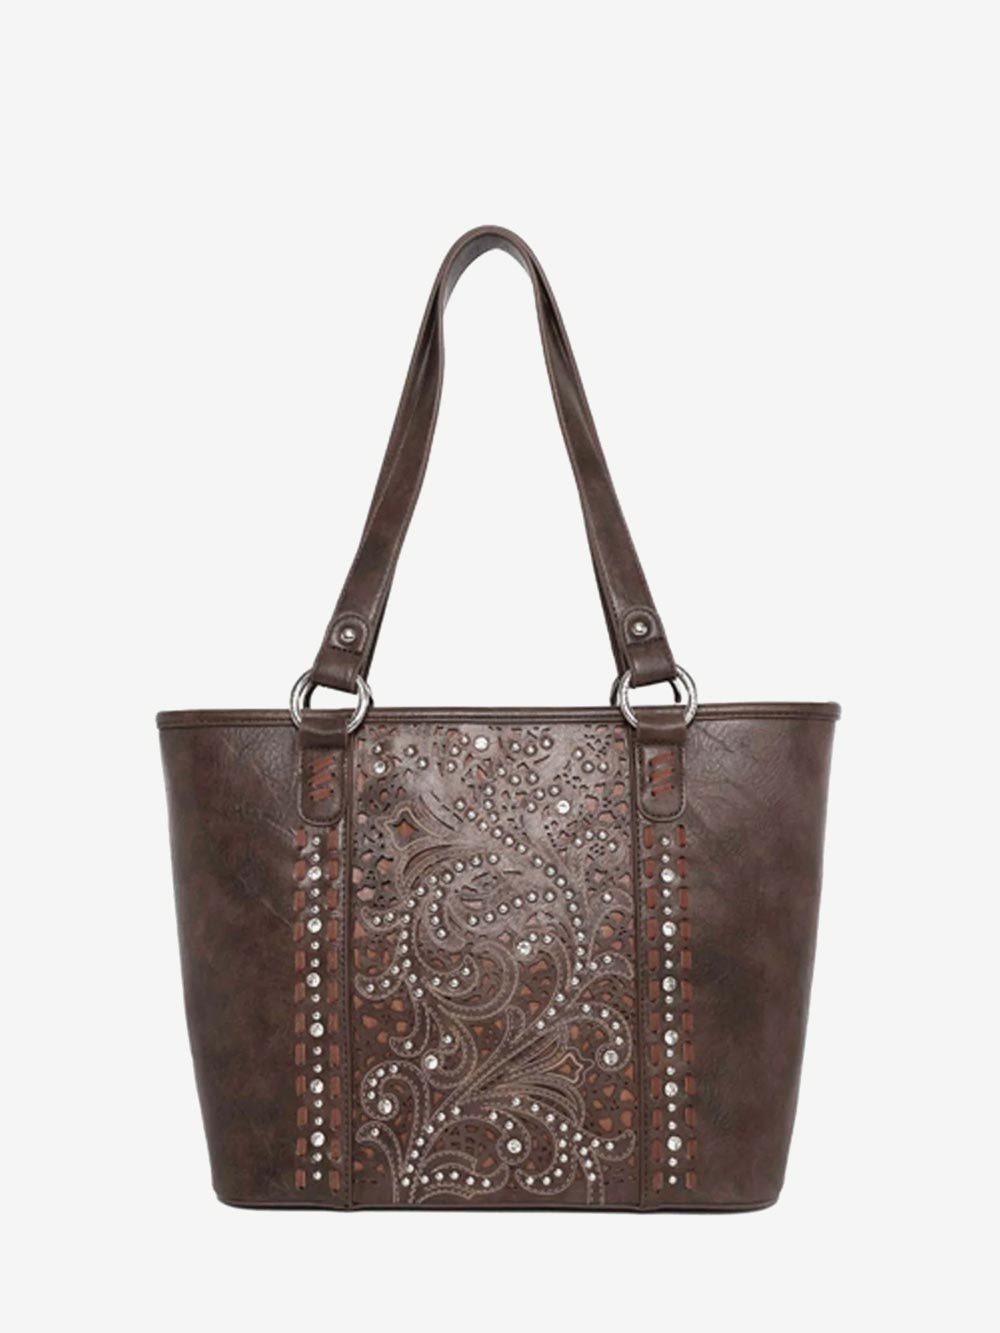 Montana West Vintage Floral Cut-Out Concealed Carry Tote - Montana West World